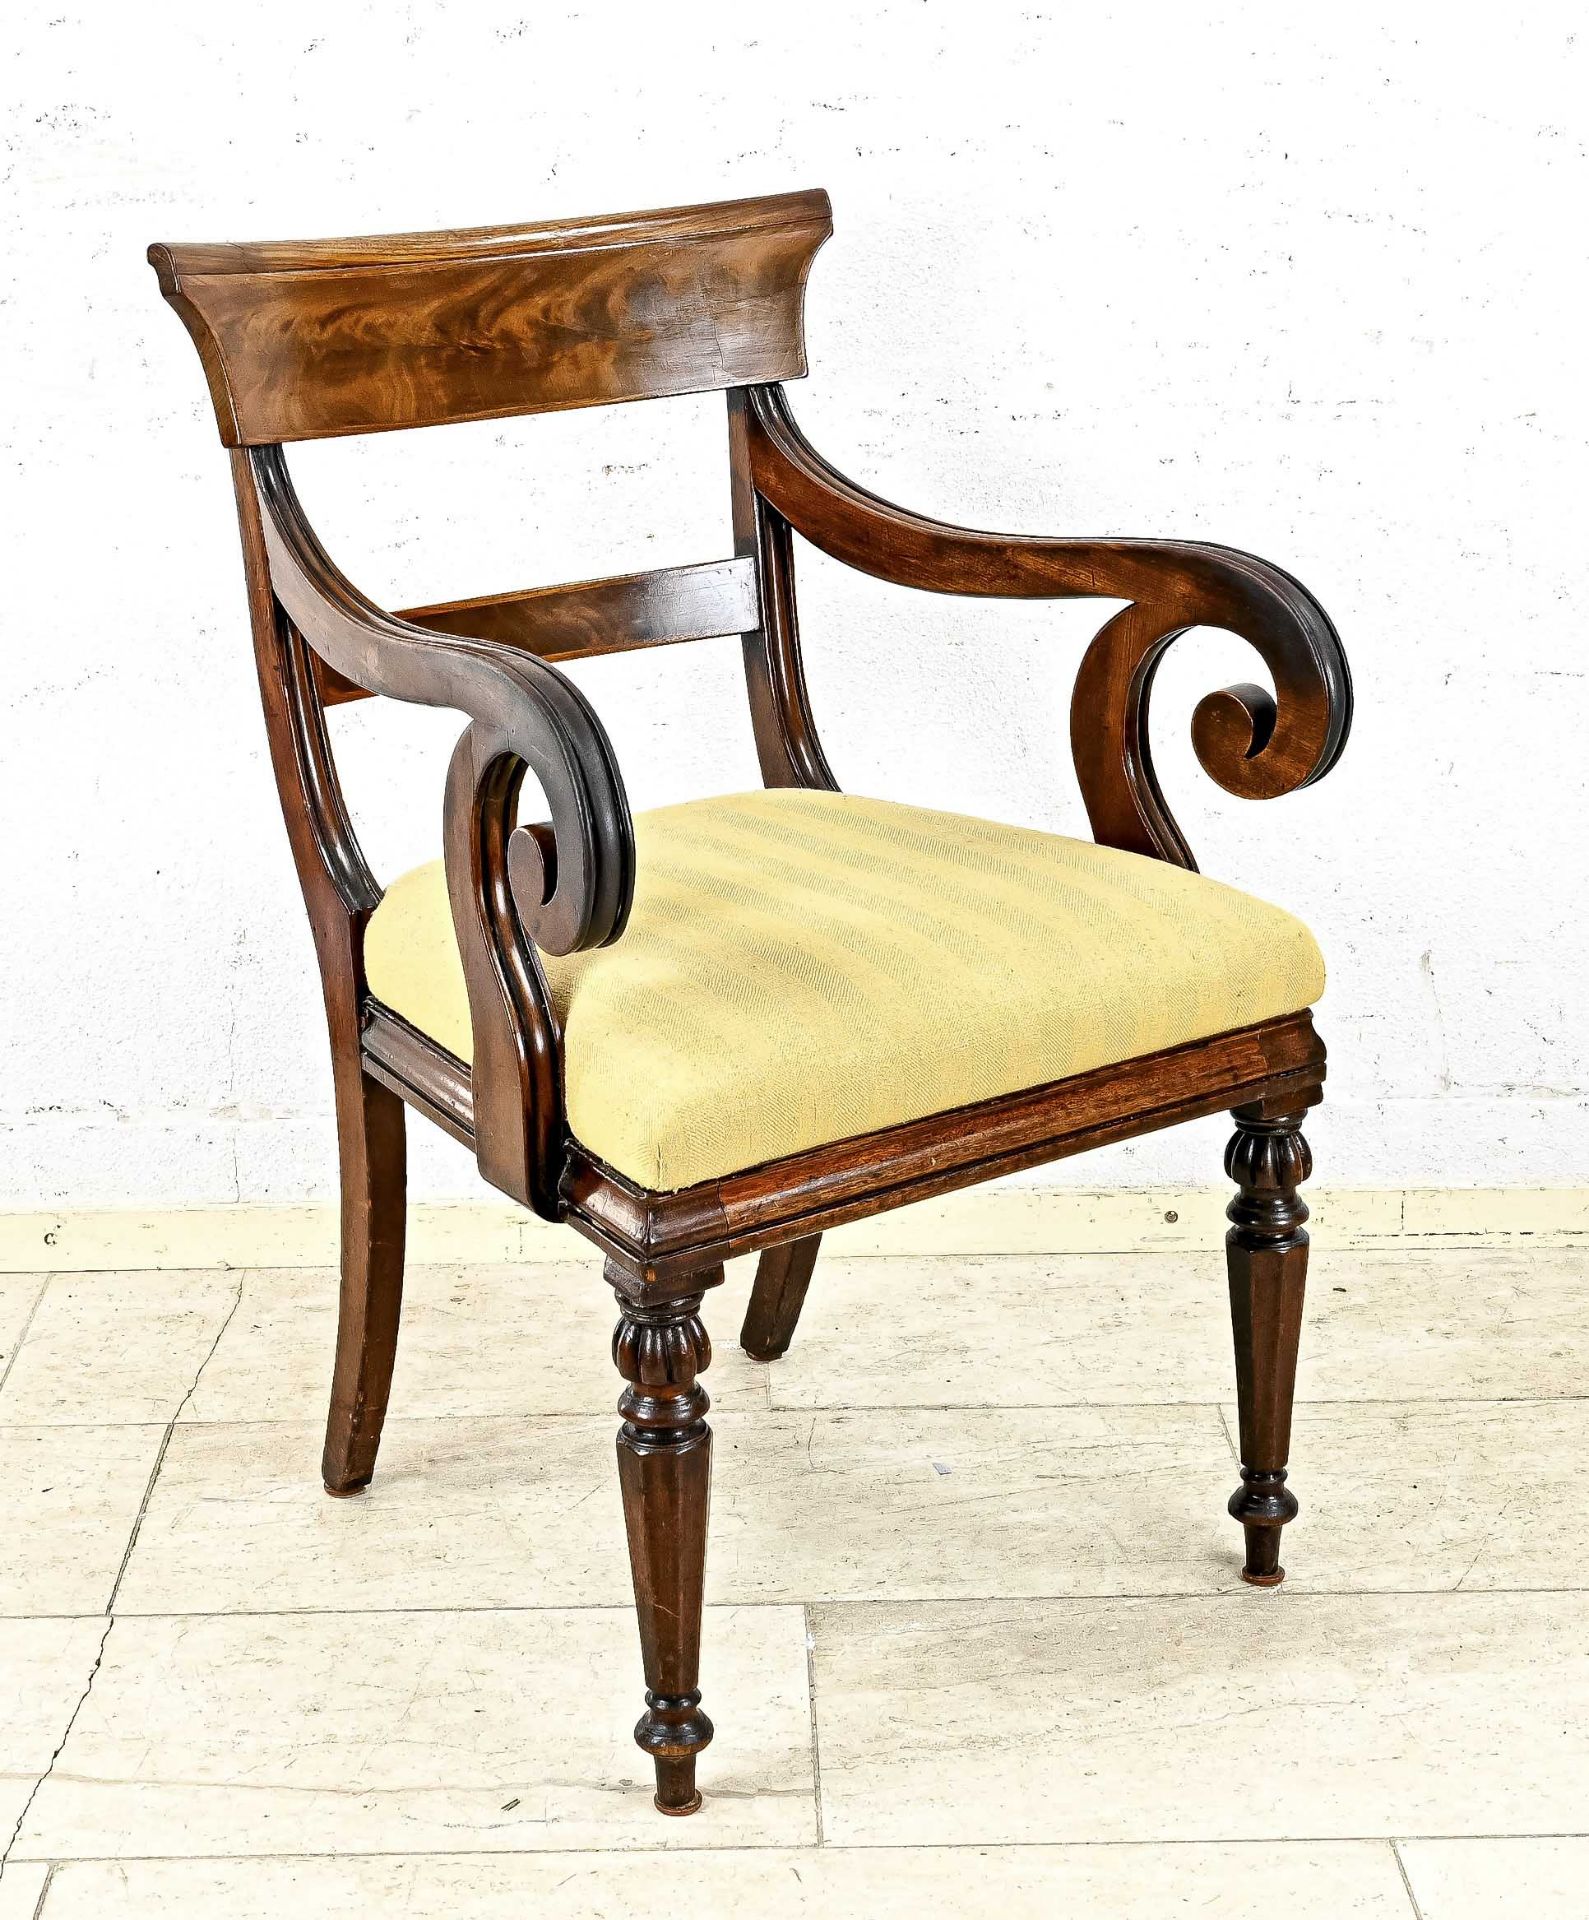 Armchair around 1860, solid mahogany, 90 x 55 x 49 cm - The furniture can not be viewed in our